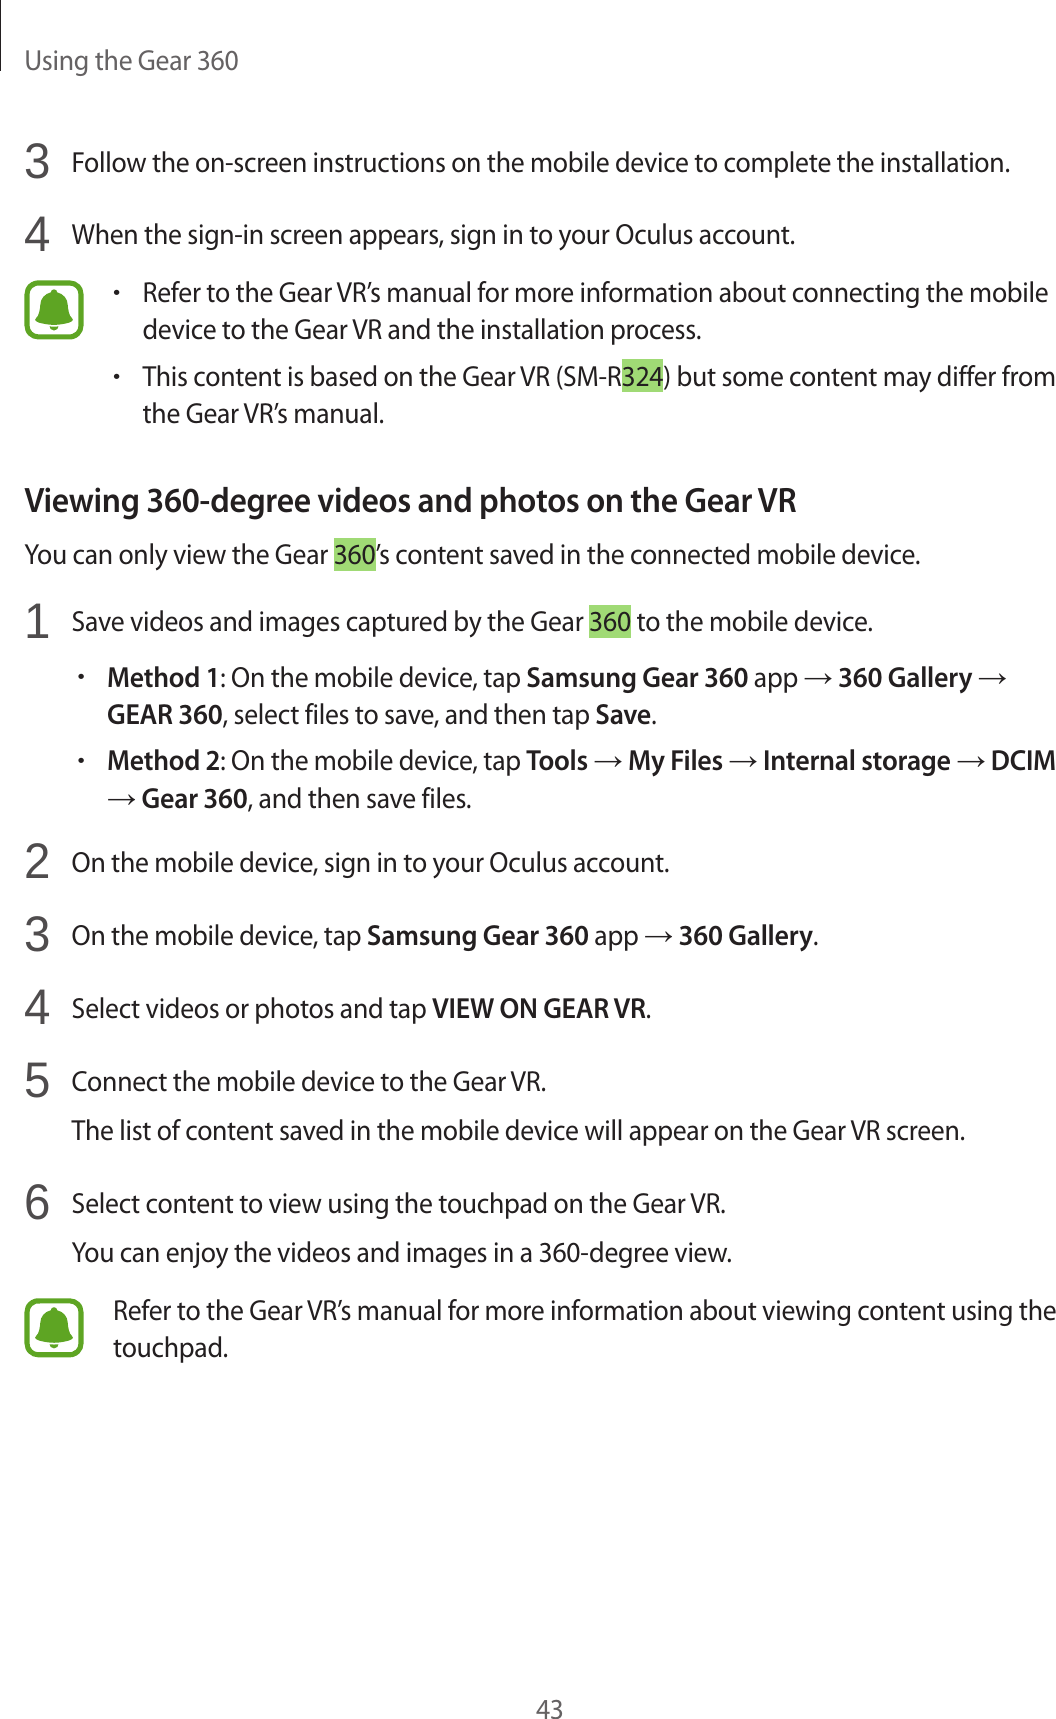 Using the Gear 360433  Follow the on-screen instructions on the mobile device to complete the installation.4  When the sign-in screen appears, sign in to your Oculus account.•Refer to the Gear VR’s manual for more information about connecting the mobile device to the Gear VR and the installation process.•This content is based on the Gear VR (SM-R324) but some content may differ from the Gear VR’s manual.Viewing 360-degree videos and photos on the Gear VRYou can only view the Gear 360’s content saved in the connected mobile device.1  Save videos and images captured by the Gear 360 to the mobile device.•Method 1: On the mobile device, tap Samsung Gear 360 app → 360 Gallery → GEAR 360, select files to save, and then tap Save.•Method 2: On the mobile device, tap Tools → My Files → Internal storage → DCIM → Gear 360, and then save files.2  On the mobile device, sign in to your Oculus account.3  On the mobile device, tap Samsung Gear 360 app → 360 Gallery.4  Select videos or photos and tap VIEW ON GEAR VR.5  Connect the mobile device to the Gear VR.The list of content saved in the mobile device will appear on the Gear VR screen.6  Select content to view using the touchpad on the Gear VR.You can enjoy the videos and images in a 360-degree view.Refer to the Gear VR’s manual for more information about viewing content using the touchpad.